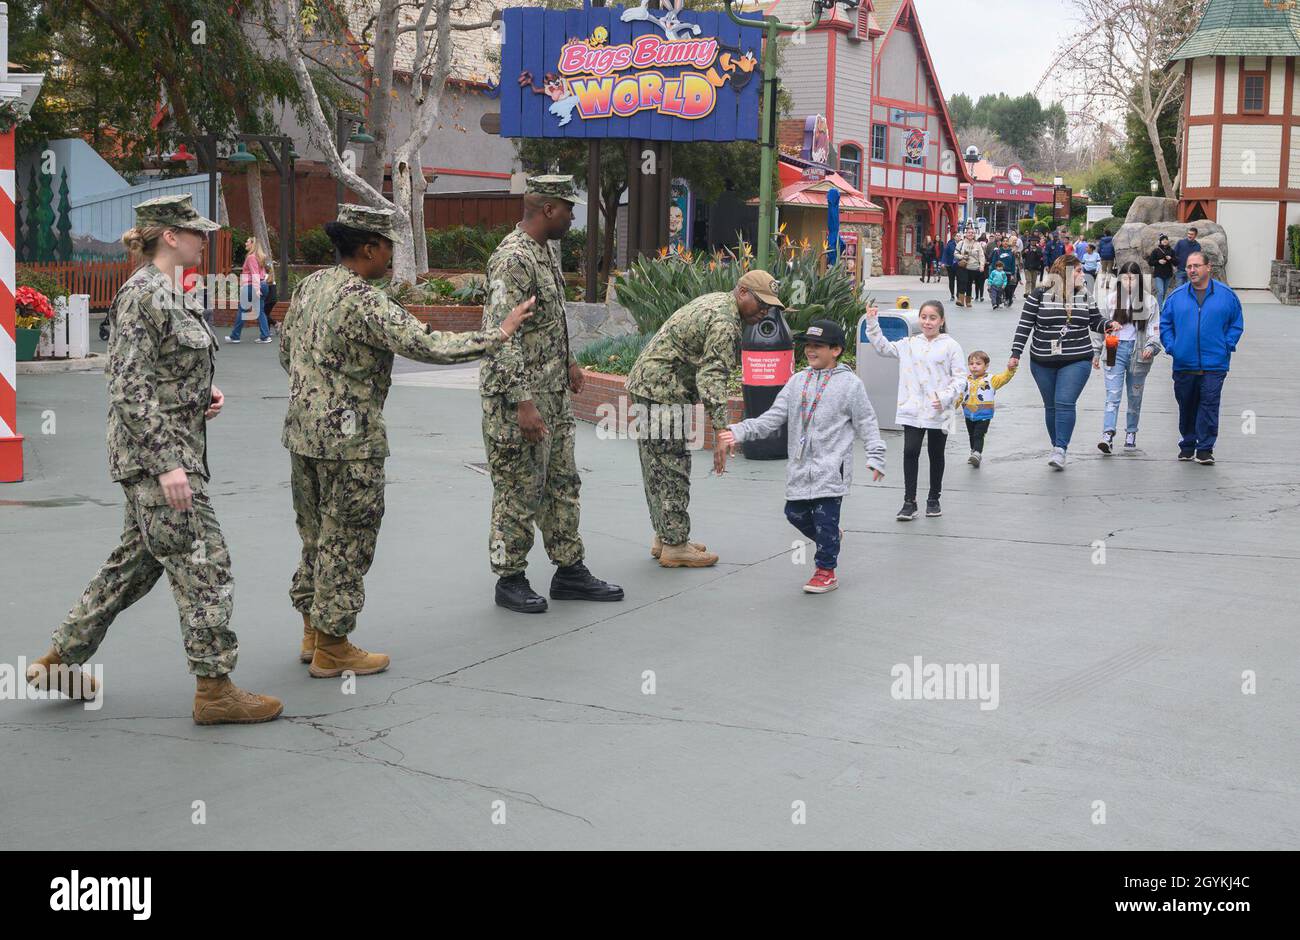 200120-N-FS414-0054 LOS ANGELES (Jan 20, 2020) -- U.S. Navy recruiters 'high five' attendees at Six Flags Magic Mountain, Los Angeles, California during Navy Recruiting Command’s “Swarm” Los Angeles evolution. A Swarm event is a large-scale recruiting effort run by the nation’s top Navy recruiters to saturate a specified market with Navy outreach, information and recruiting assets. (U.S. Navy photo by Mass Communication Specialist 2nd Class Preston Jarrett/Released) Stock Photo